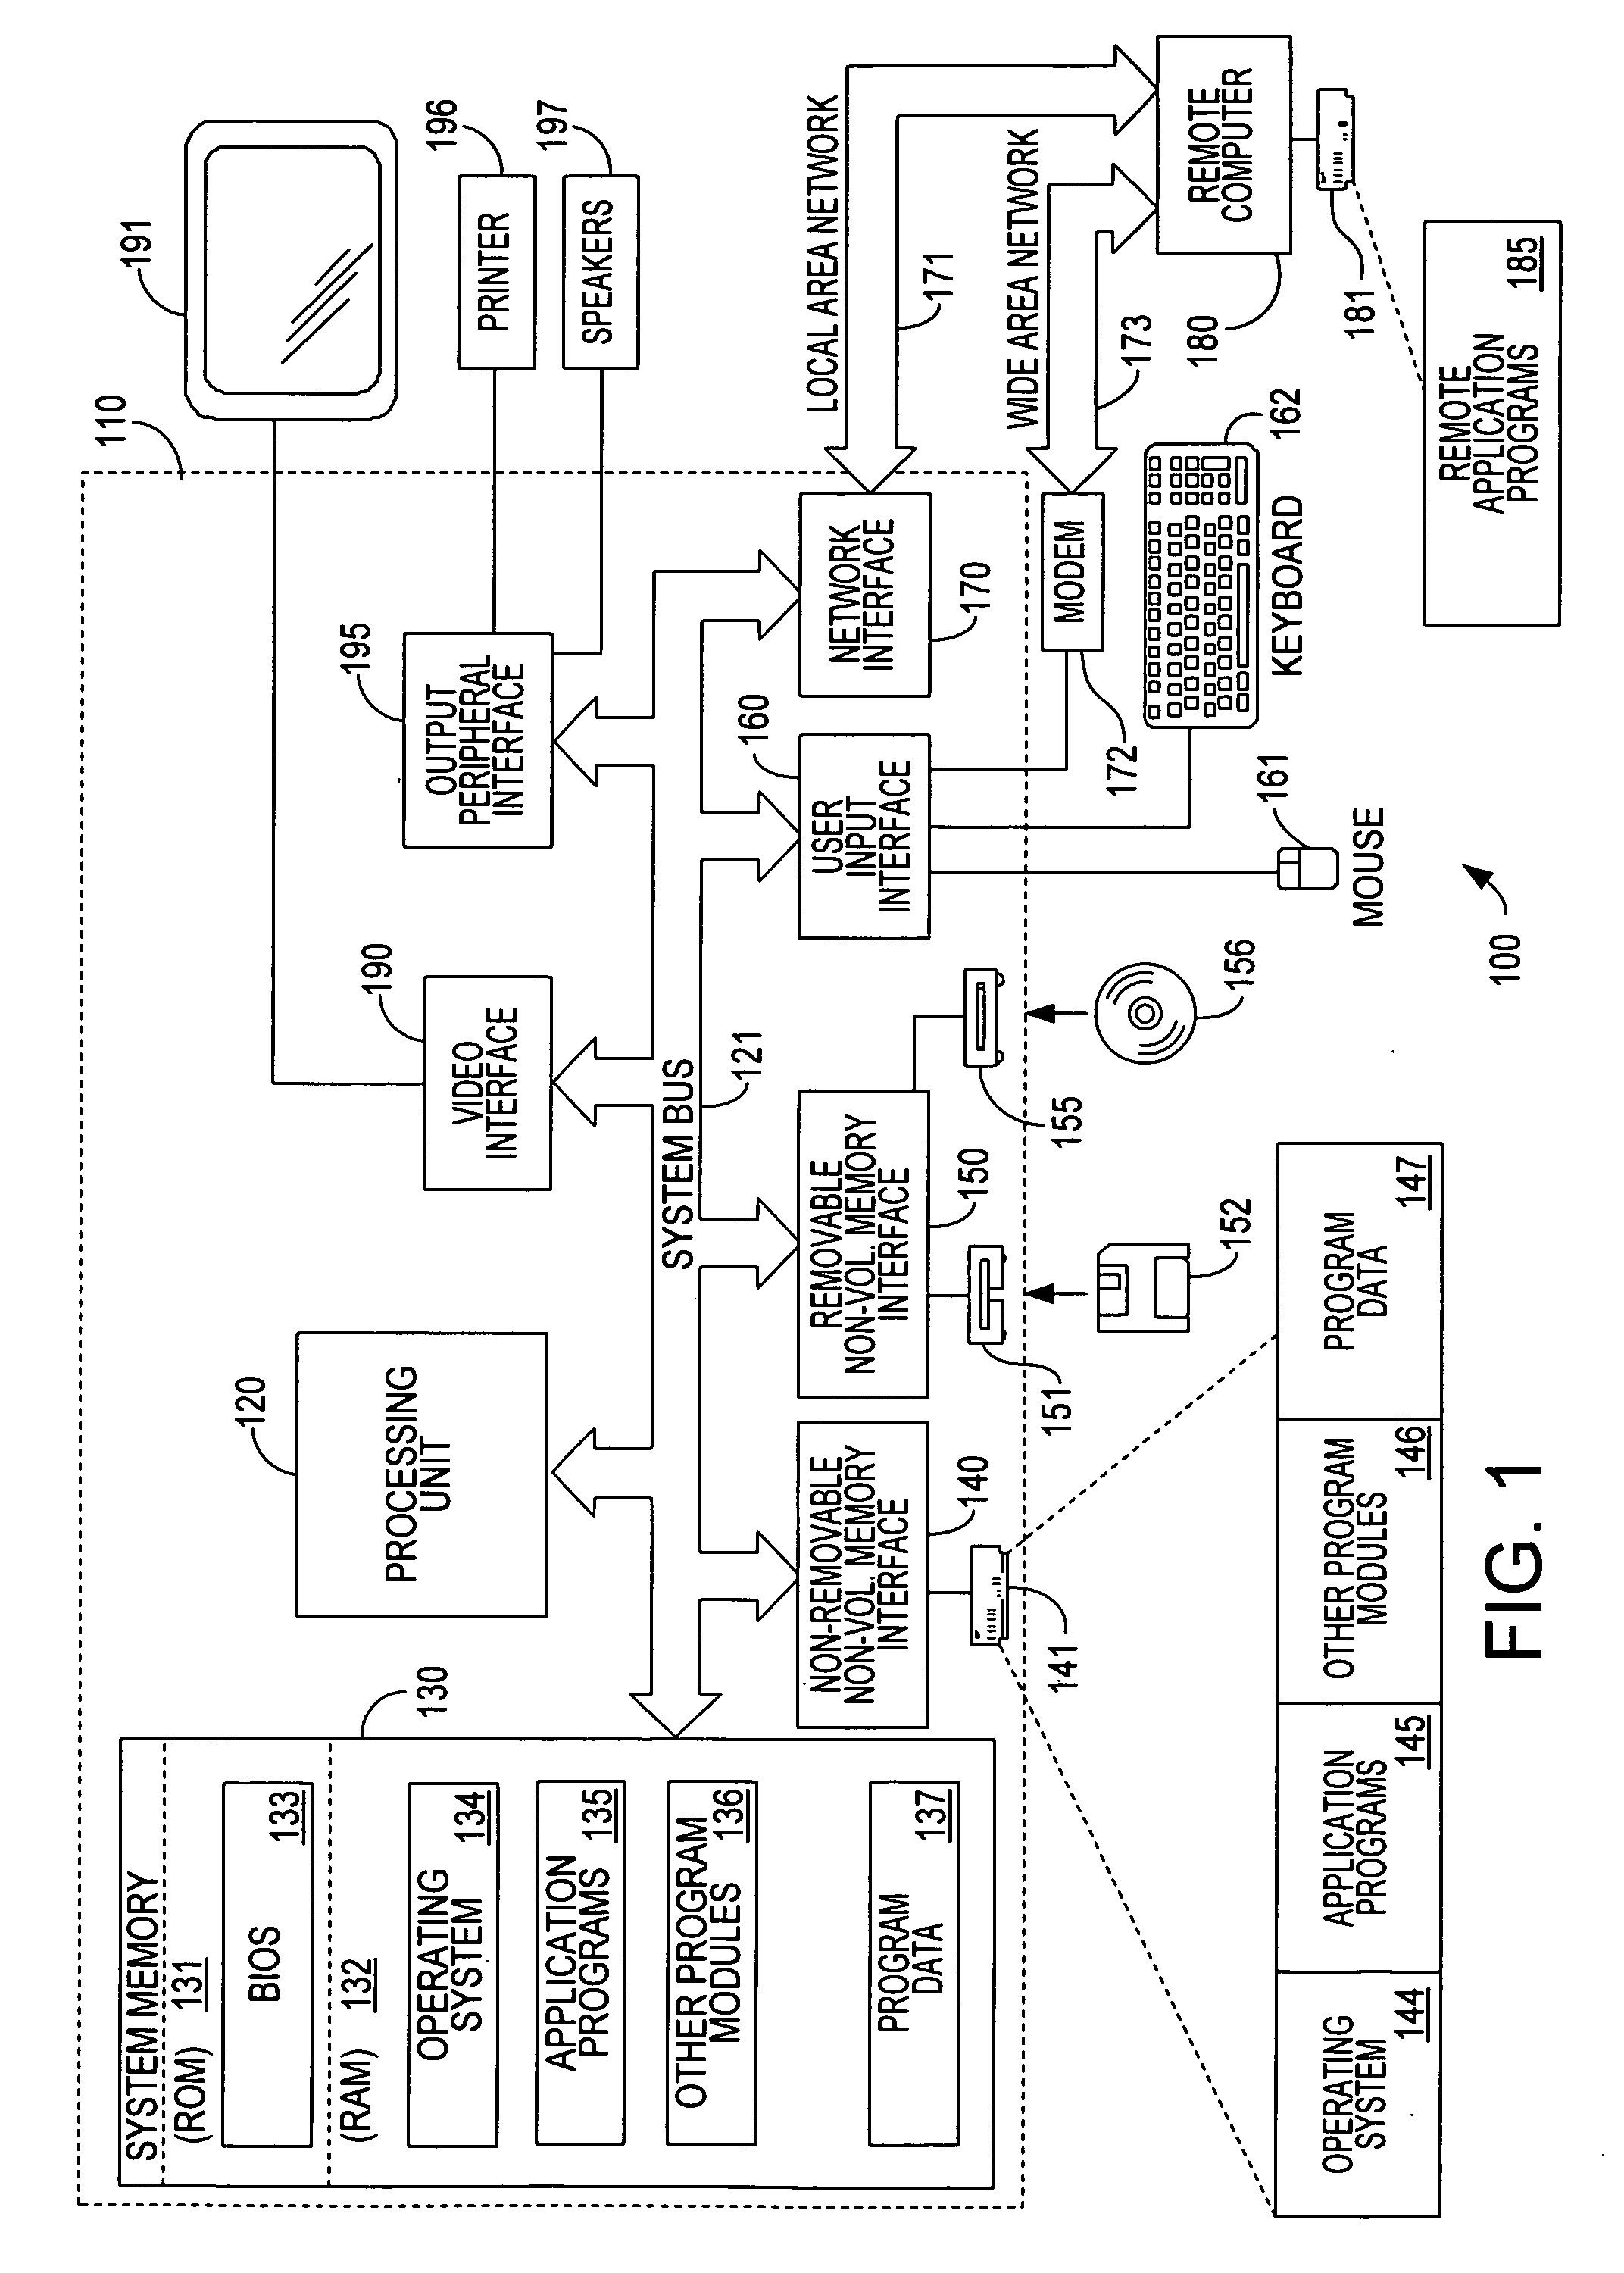 System and method for achieving zero-configuration wireless computing and computing device incorporating same